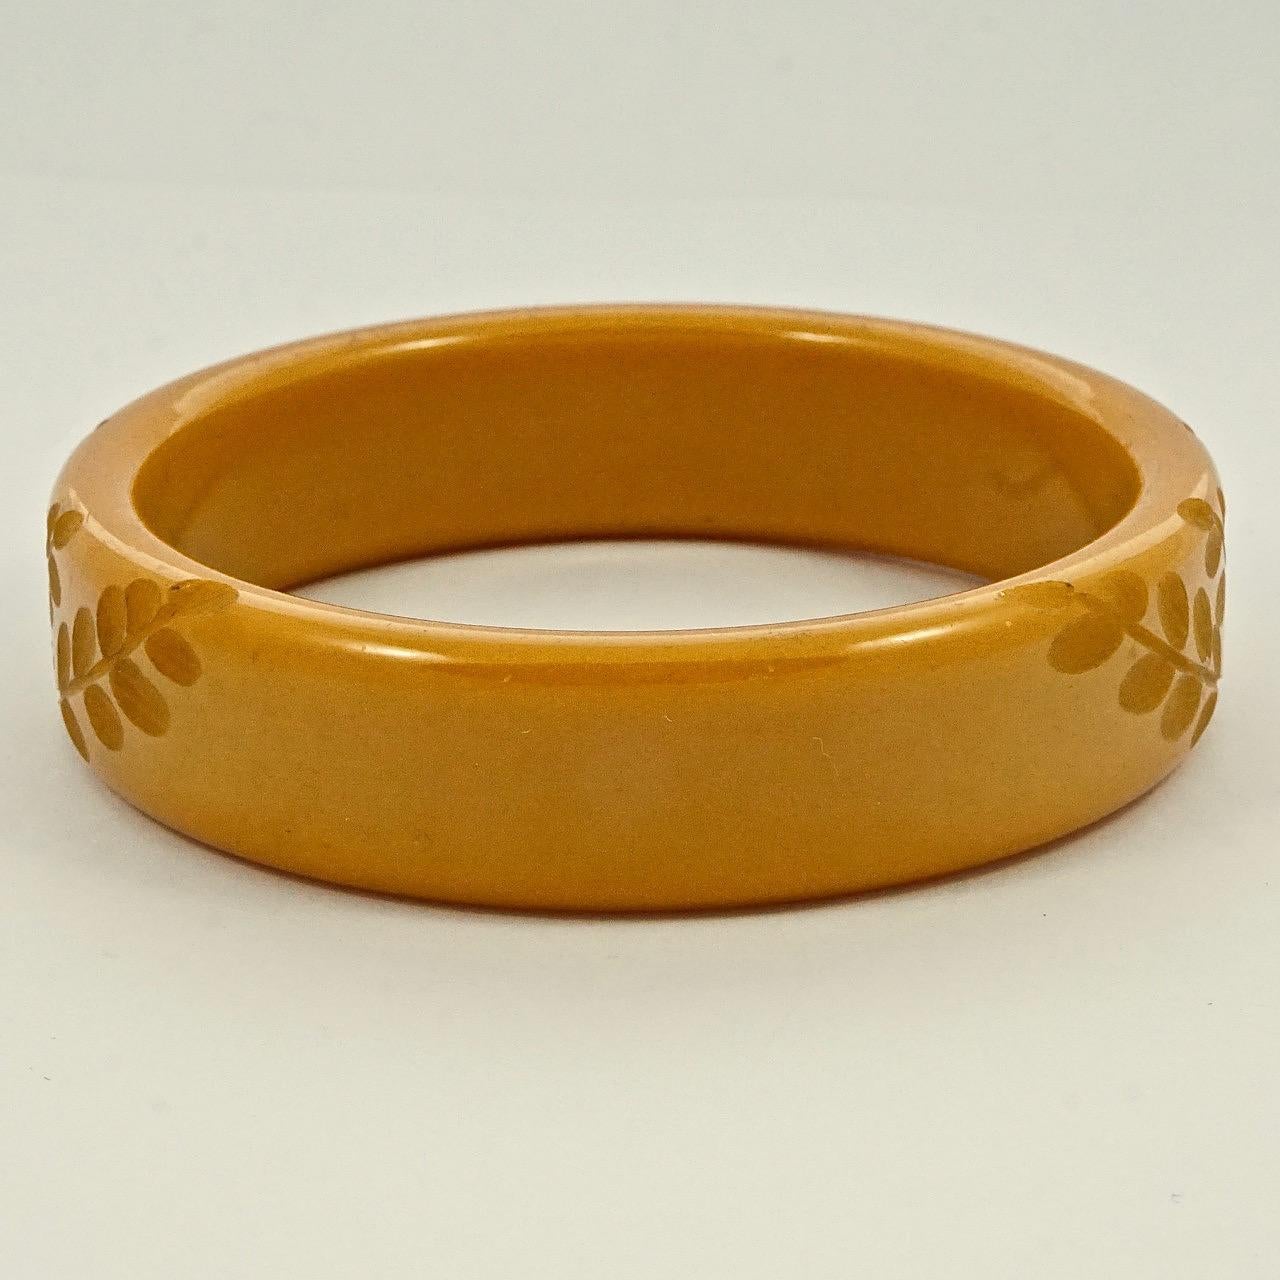 Wonderful Art Deco caramel yellow Bakelite bangle with lovely leaves carving. Inside diameter 6.35cm / 2.5 inches by width 1.7cm / .67 inch. The bangle is in very good condition.

This is a beautiful vintage carved Bakelite bangle in caramel yellow.